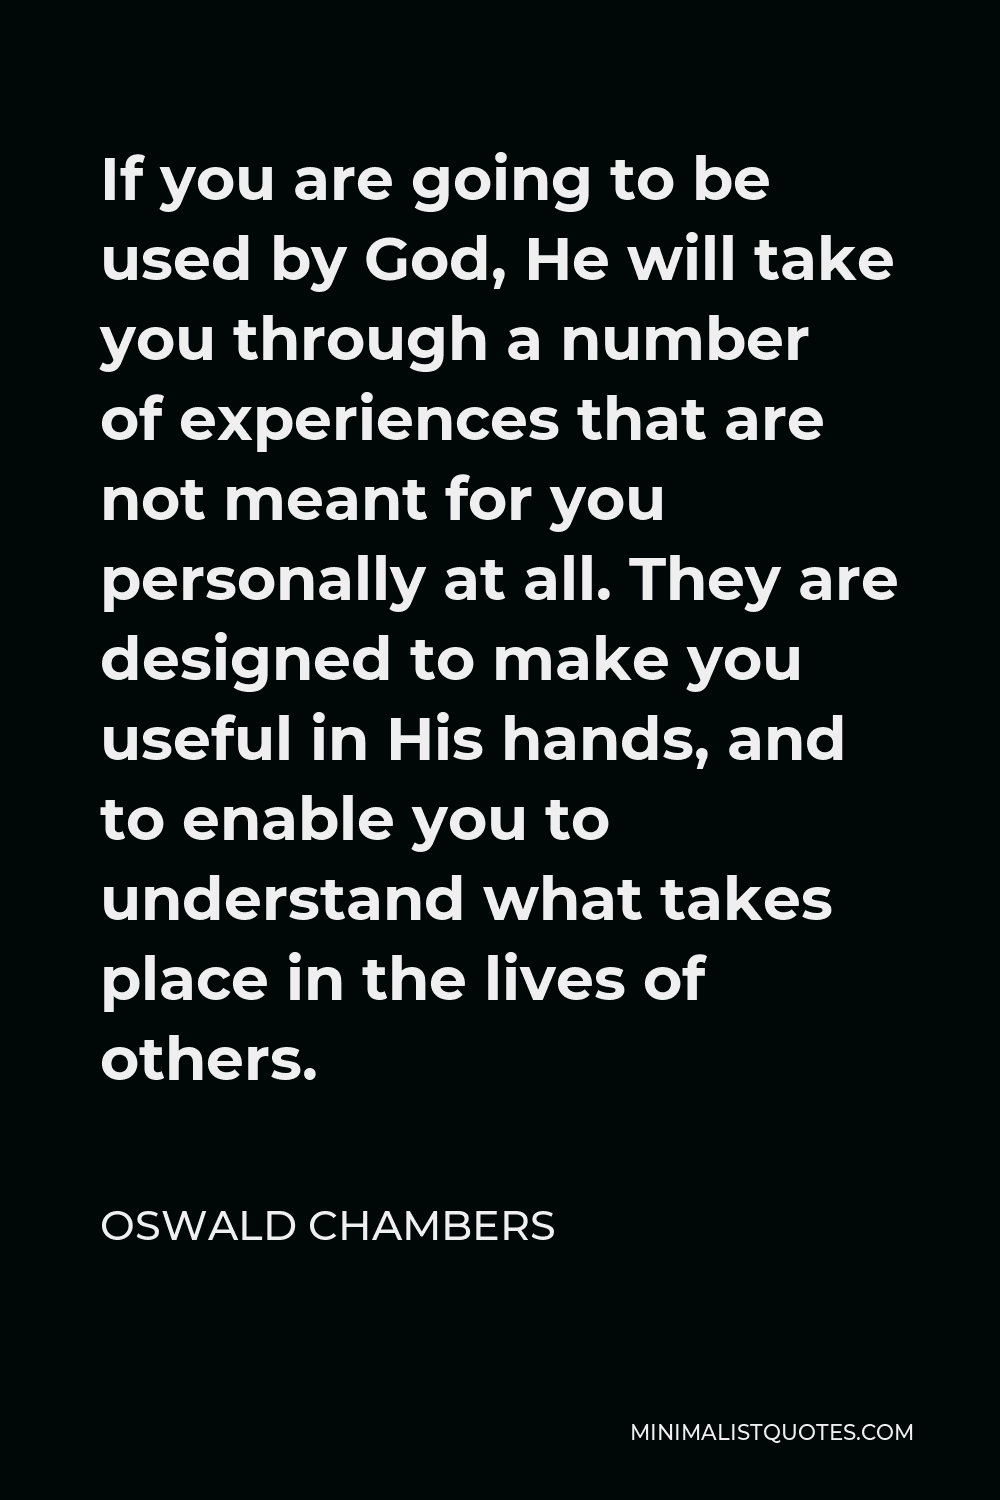 Oswald Chambers Quote - If you are going to be used by God, He will take you through a number of experiences that are not meant for you personally at all. They are designed to make you useful in His hands, and to enable you to understand what takes place in the lives of others.